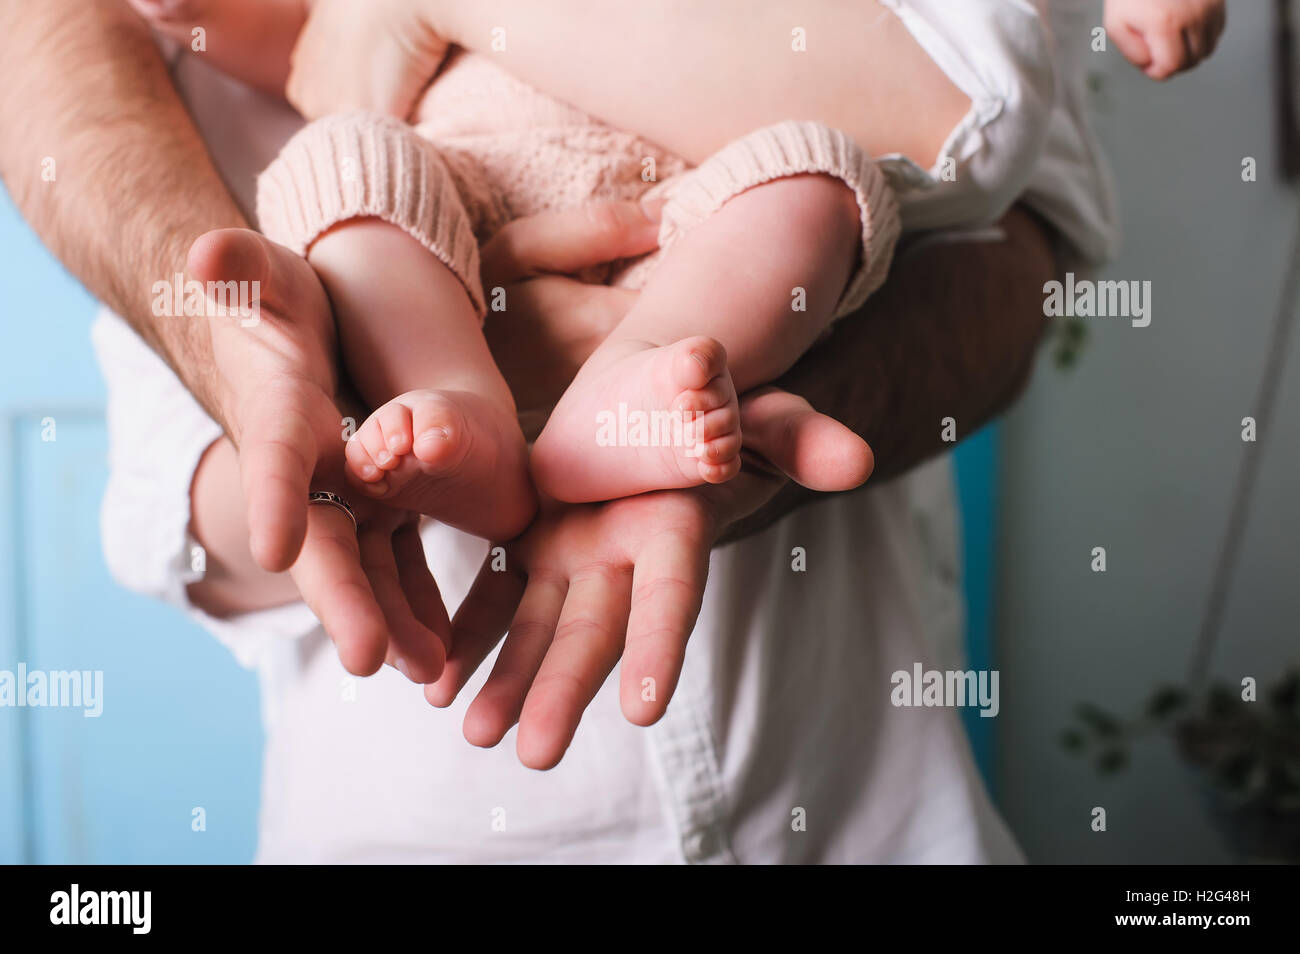 https://c8.alamy.com/comp/H2G48H/dad-holding-newborn-daughter-fathers-hands-holding-and-showing-his-H2G48H.jpg